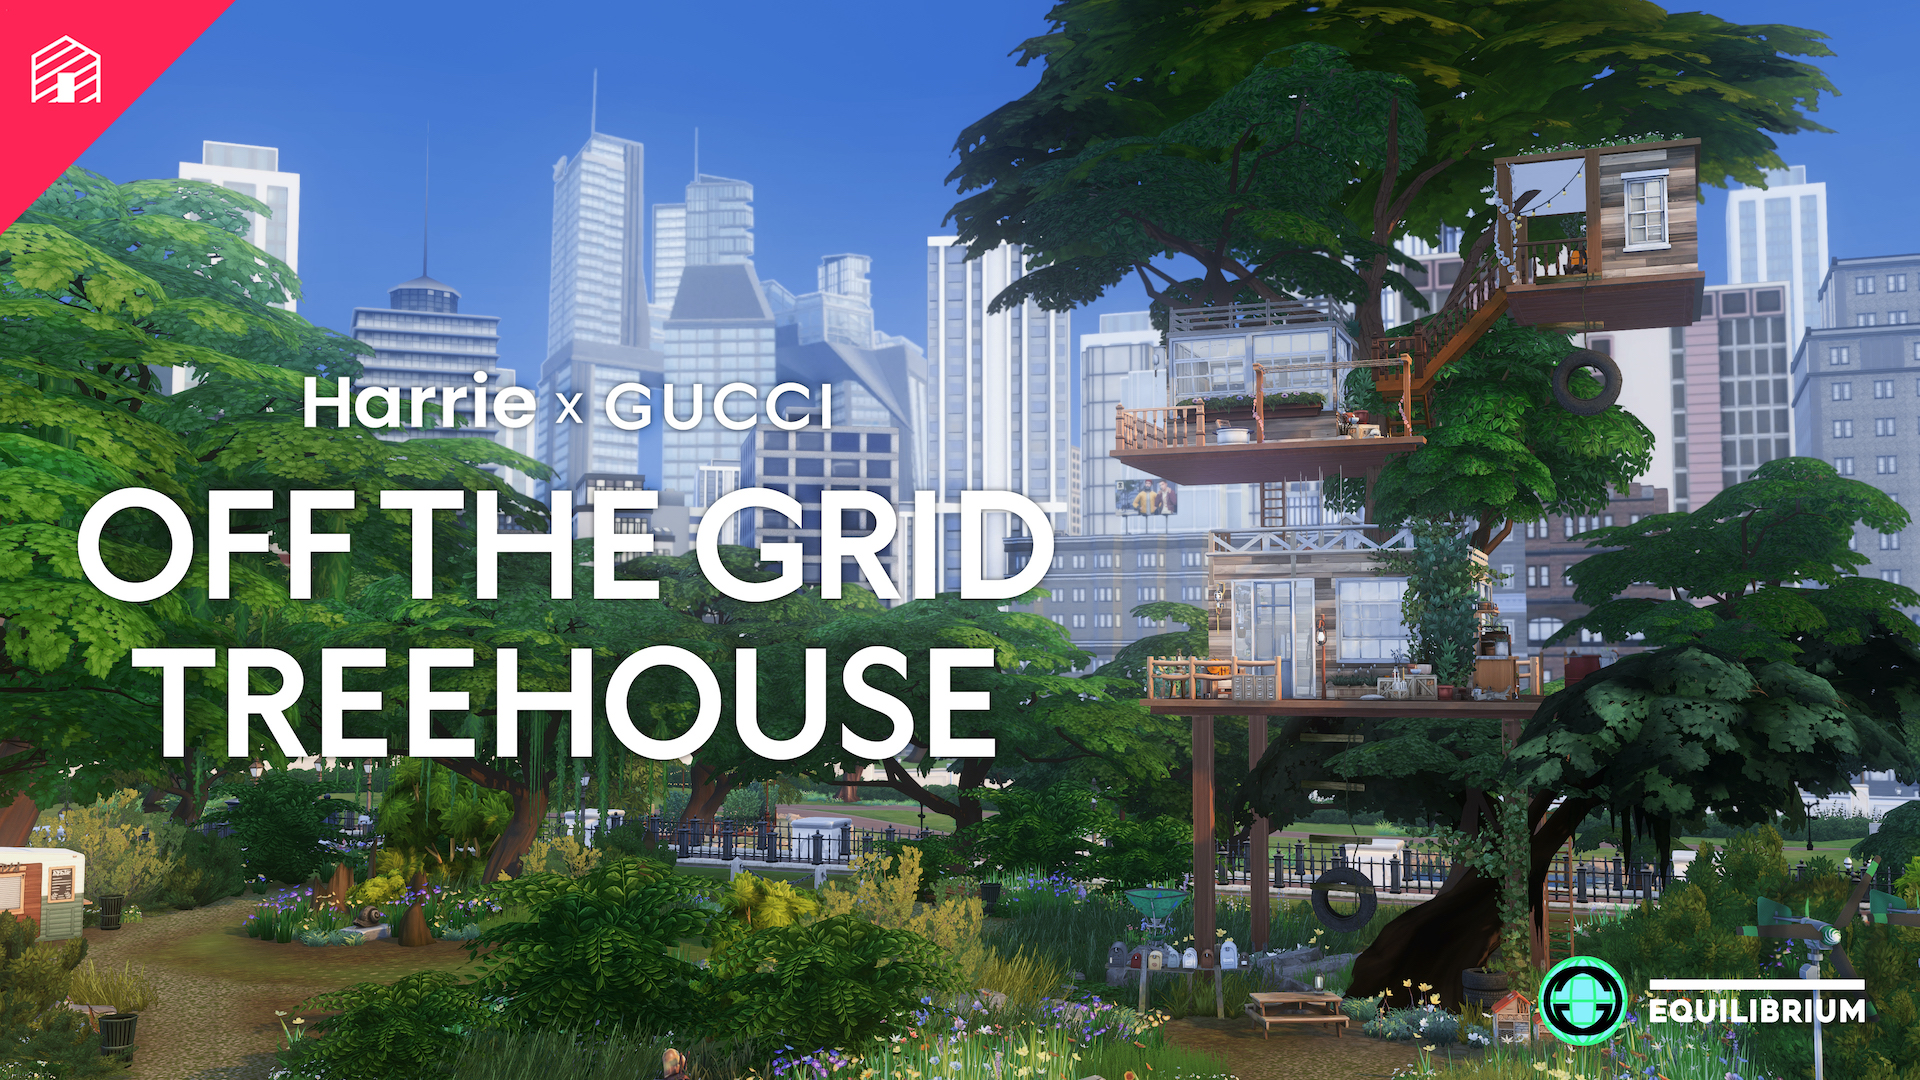 Kloster fravær panel Gucci Off The Grid Debuts in The Sims 4 Player Community – Gucci Equilibrium